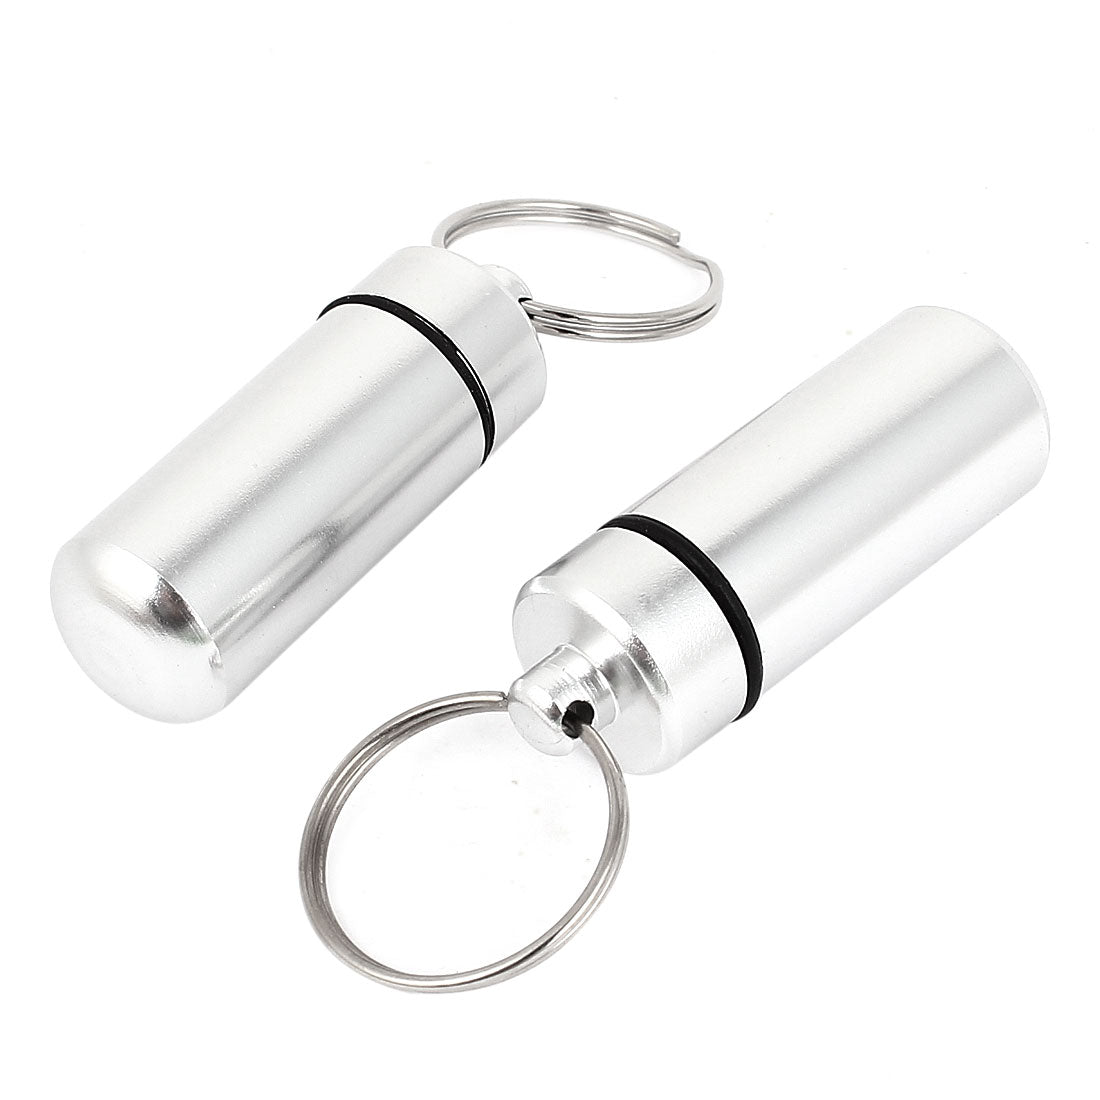 uxcell Uxcell 2pcs Chrome Waterproof Aluminum Pill Bottle Cache Holder Container Keychain